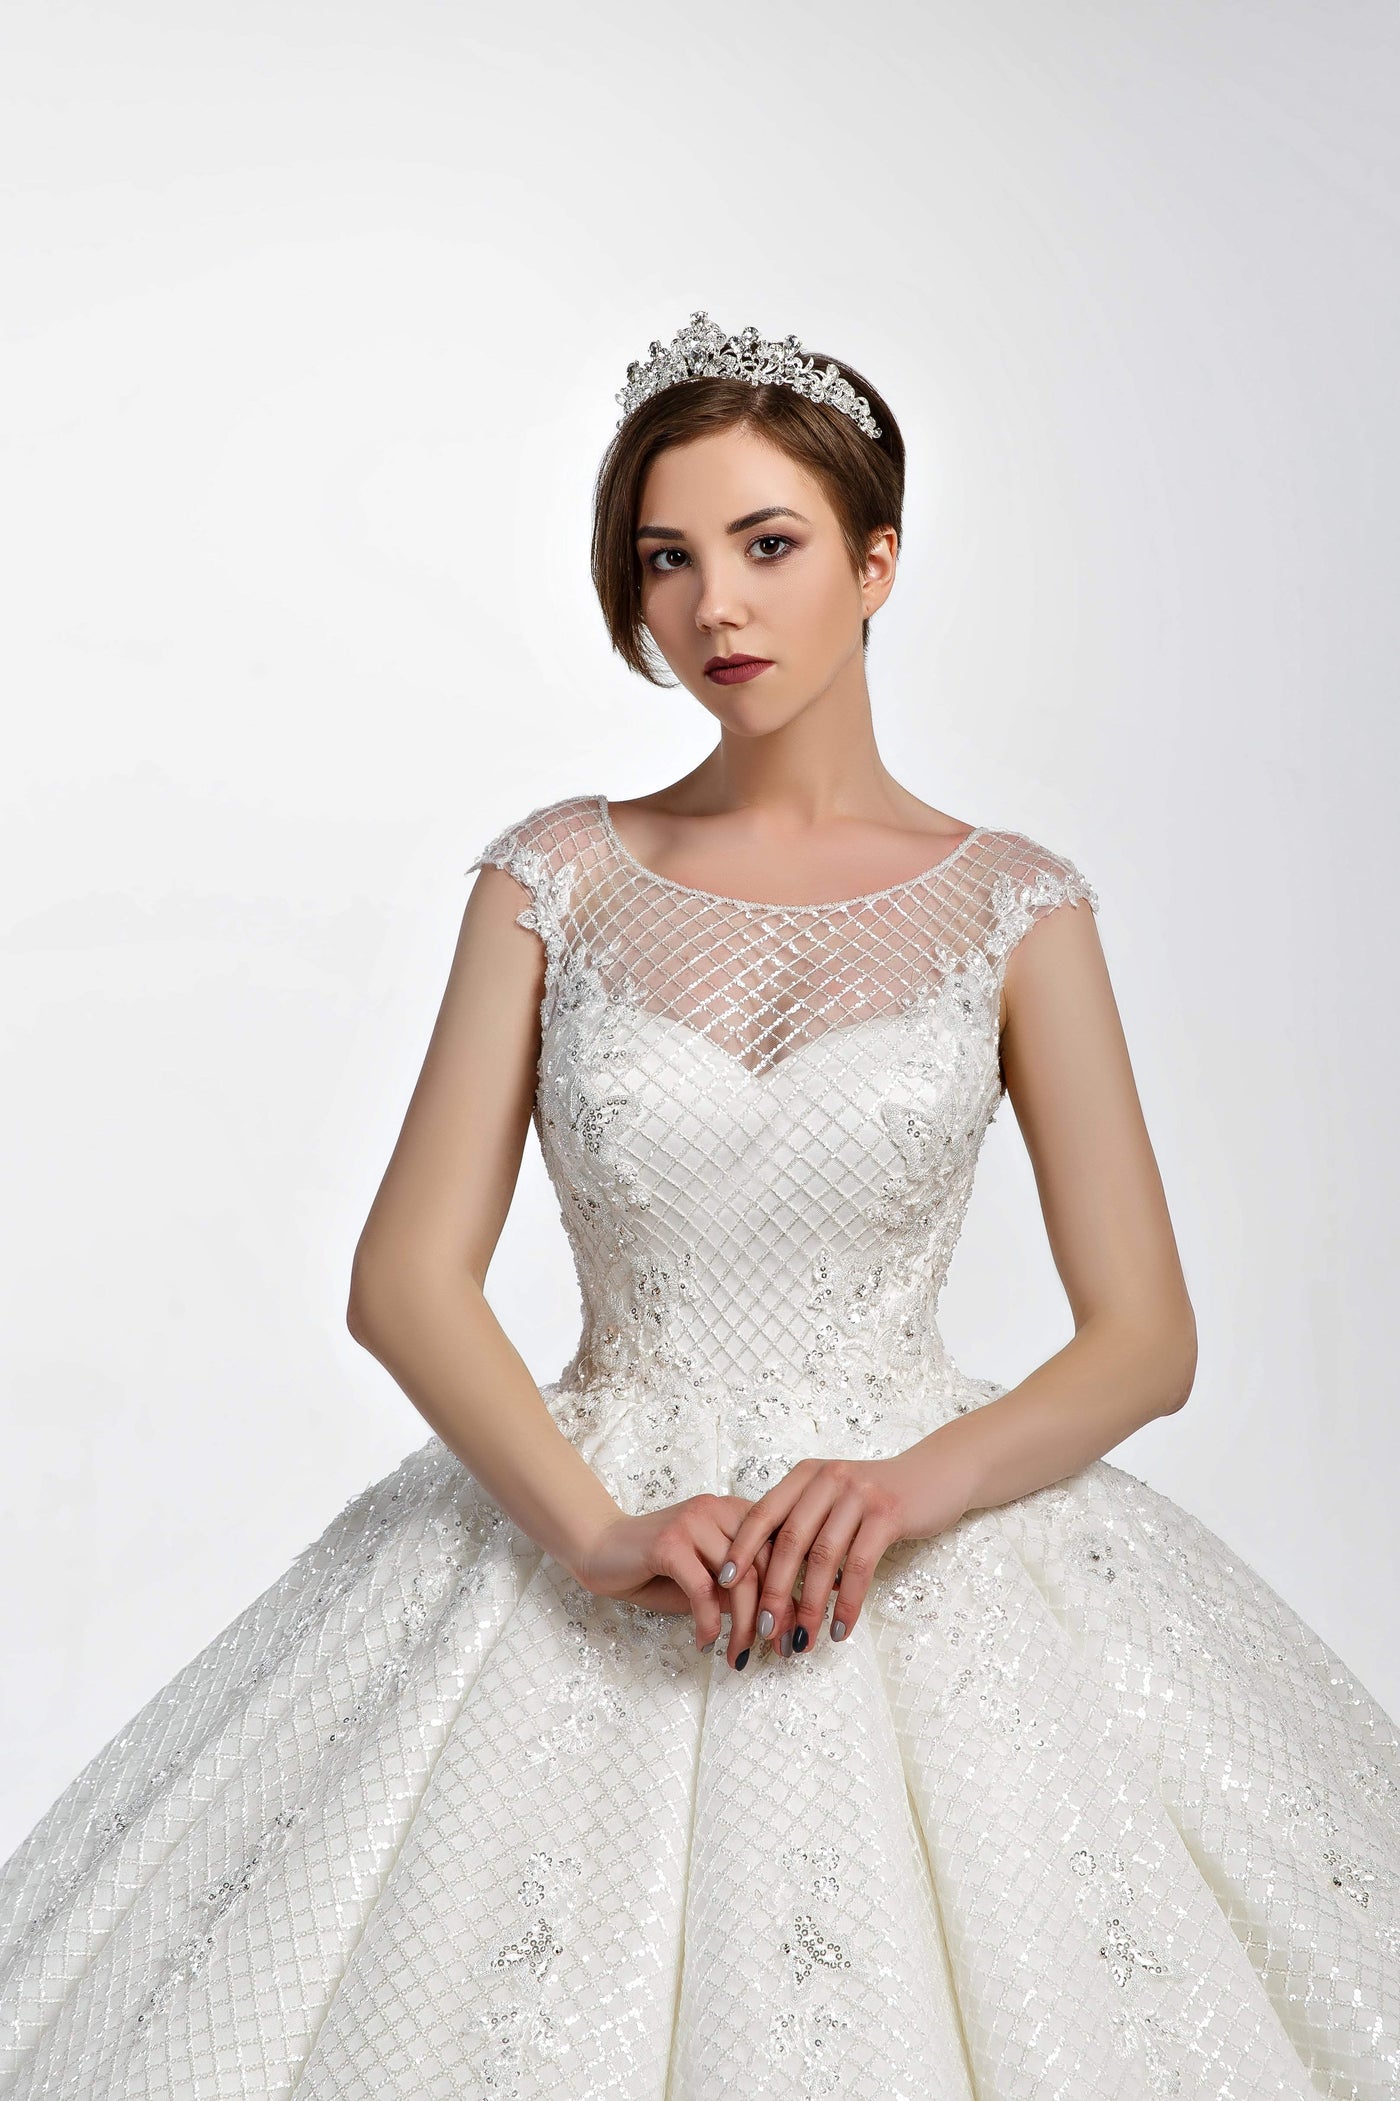 White Ball Gown Lace Dress-Ball Gown,Classic Elegant Gowns,Royal Wedding Dresses